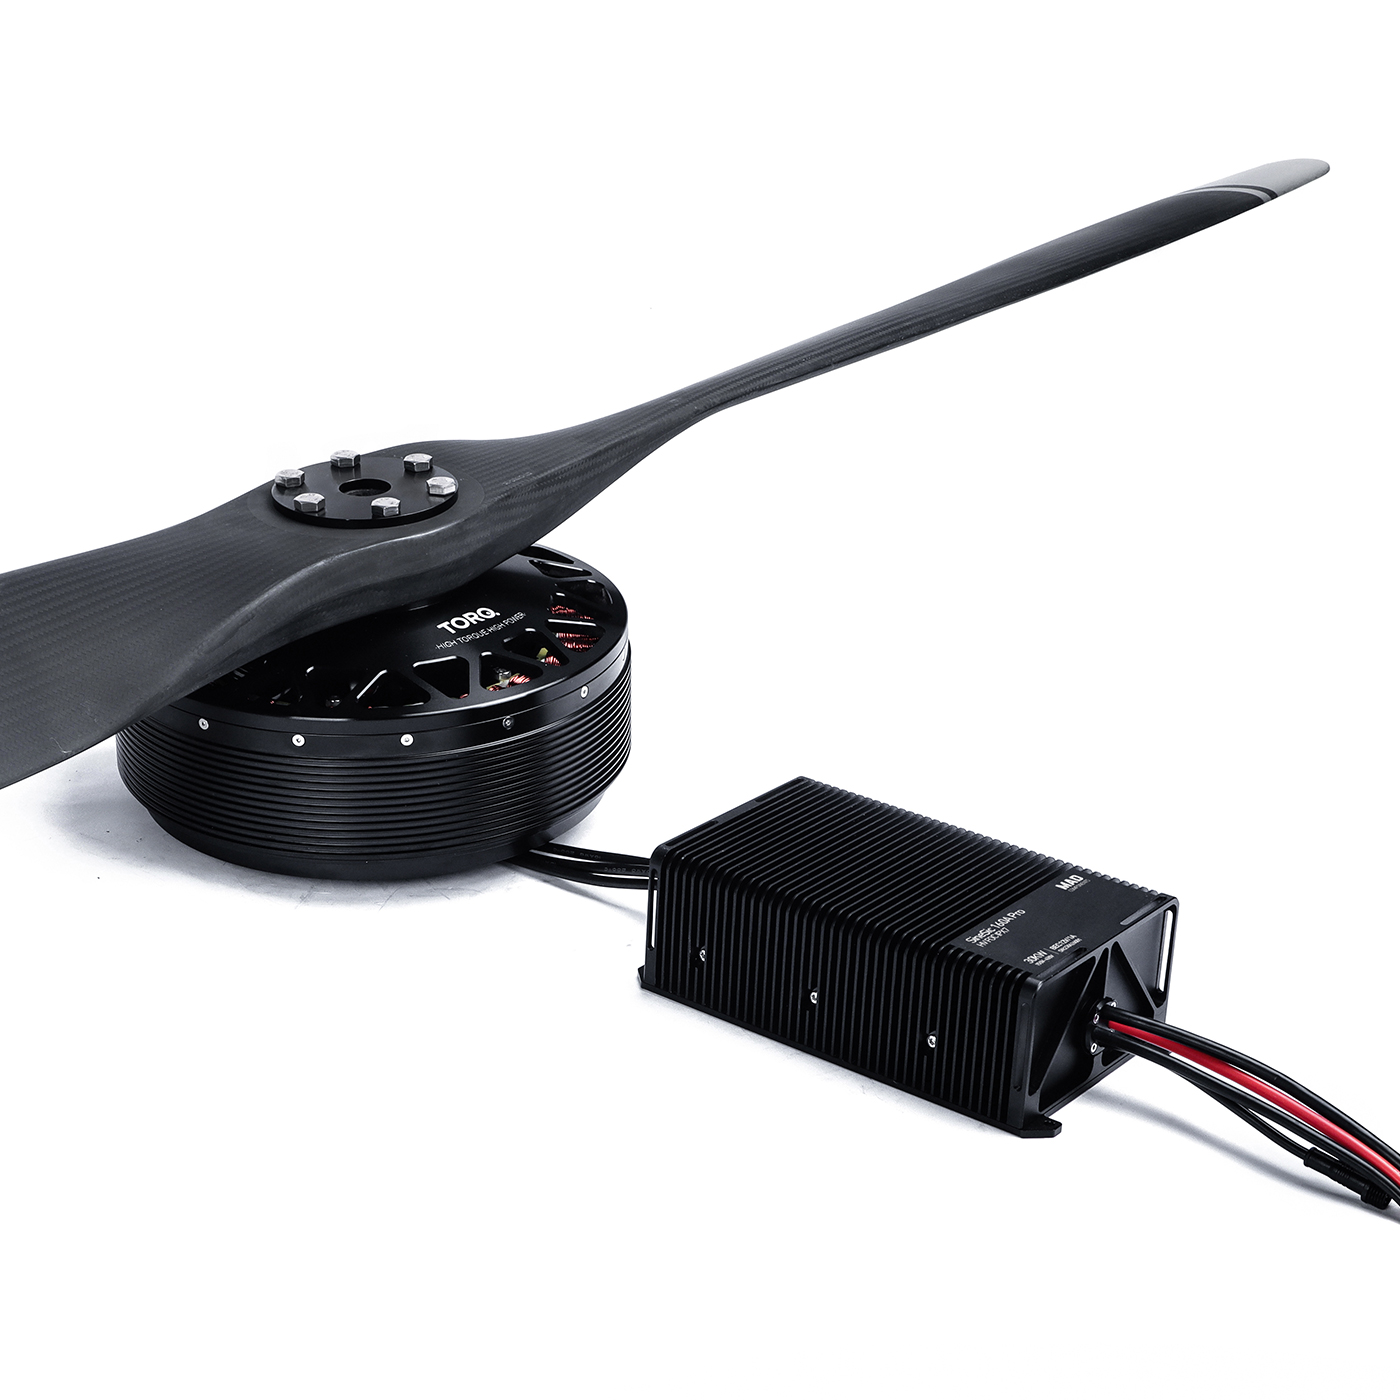 HB110 MAD Hummingbird  electric motor for large-scale multi-rotor/e-VTOL drones capable of carrying heavy loads flying car ,delivery drone,urban mobility